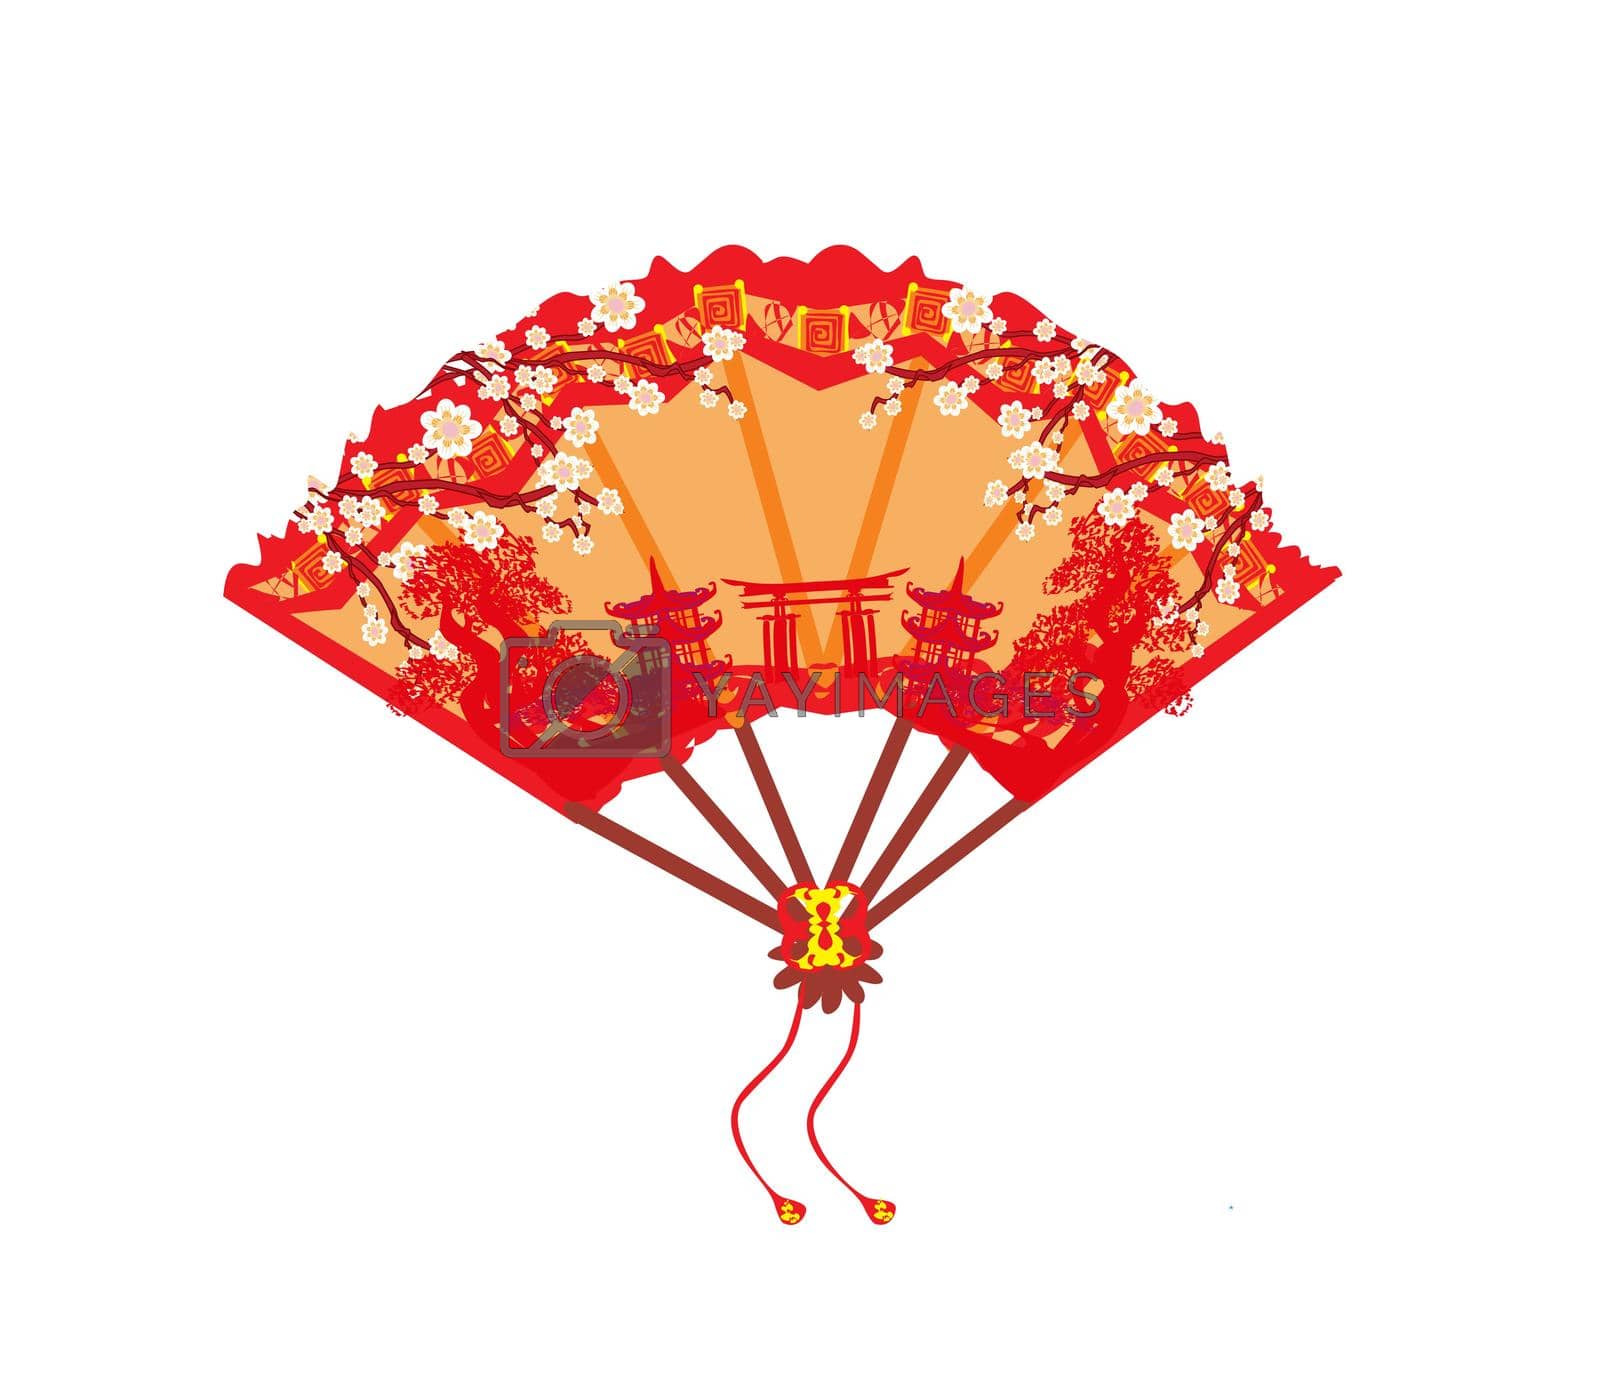 Royalty free image of Chinese landscape - fan by JackyBrown